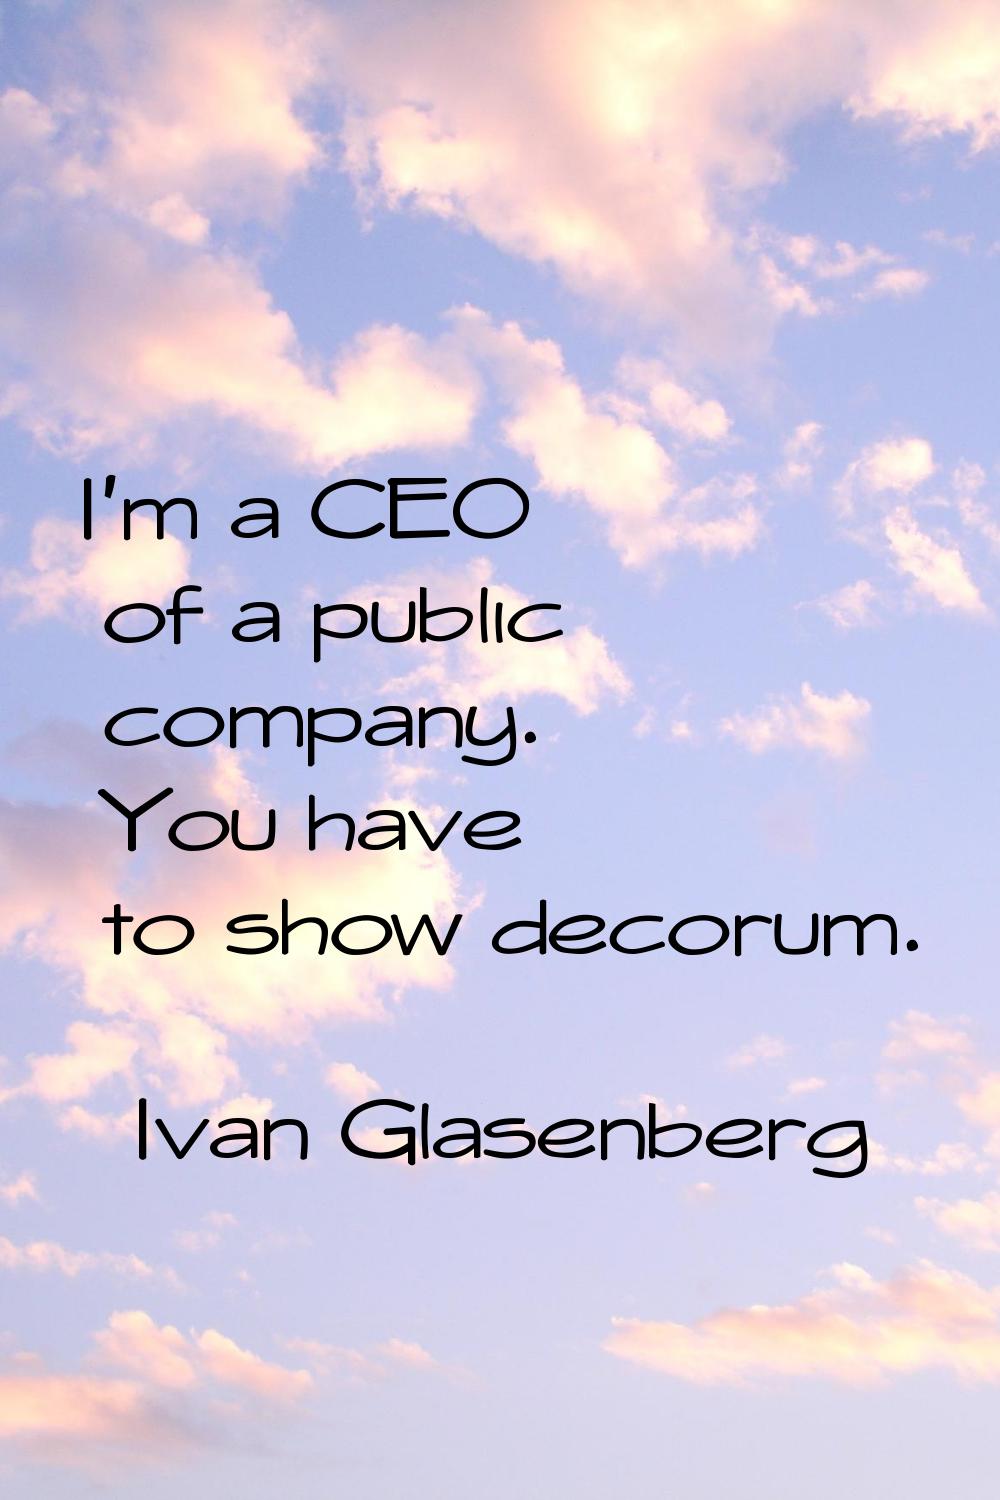 I'm a CEO of a public company. You have to show decorum.